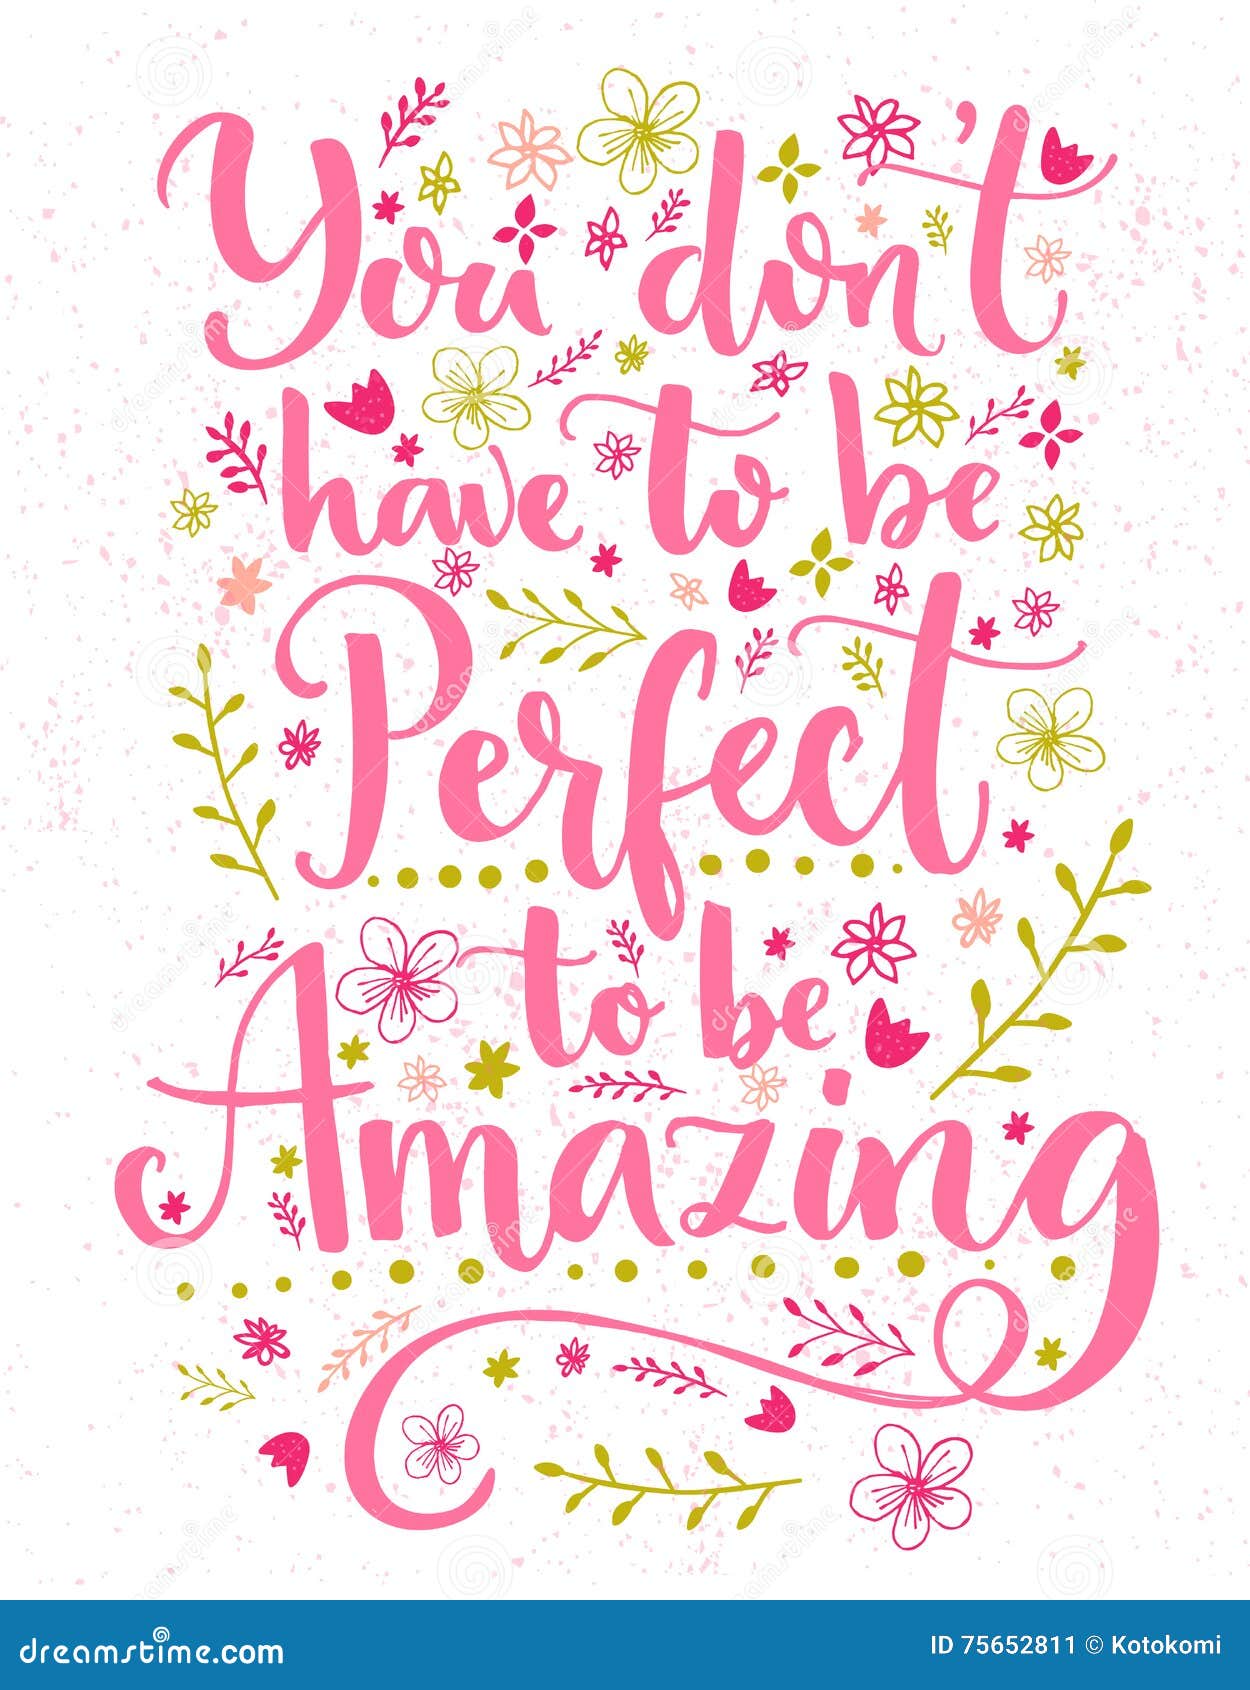 you don't have to be perfect to be amazing. inspirational quote card with hand lettering and flowers decorations. 